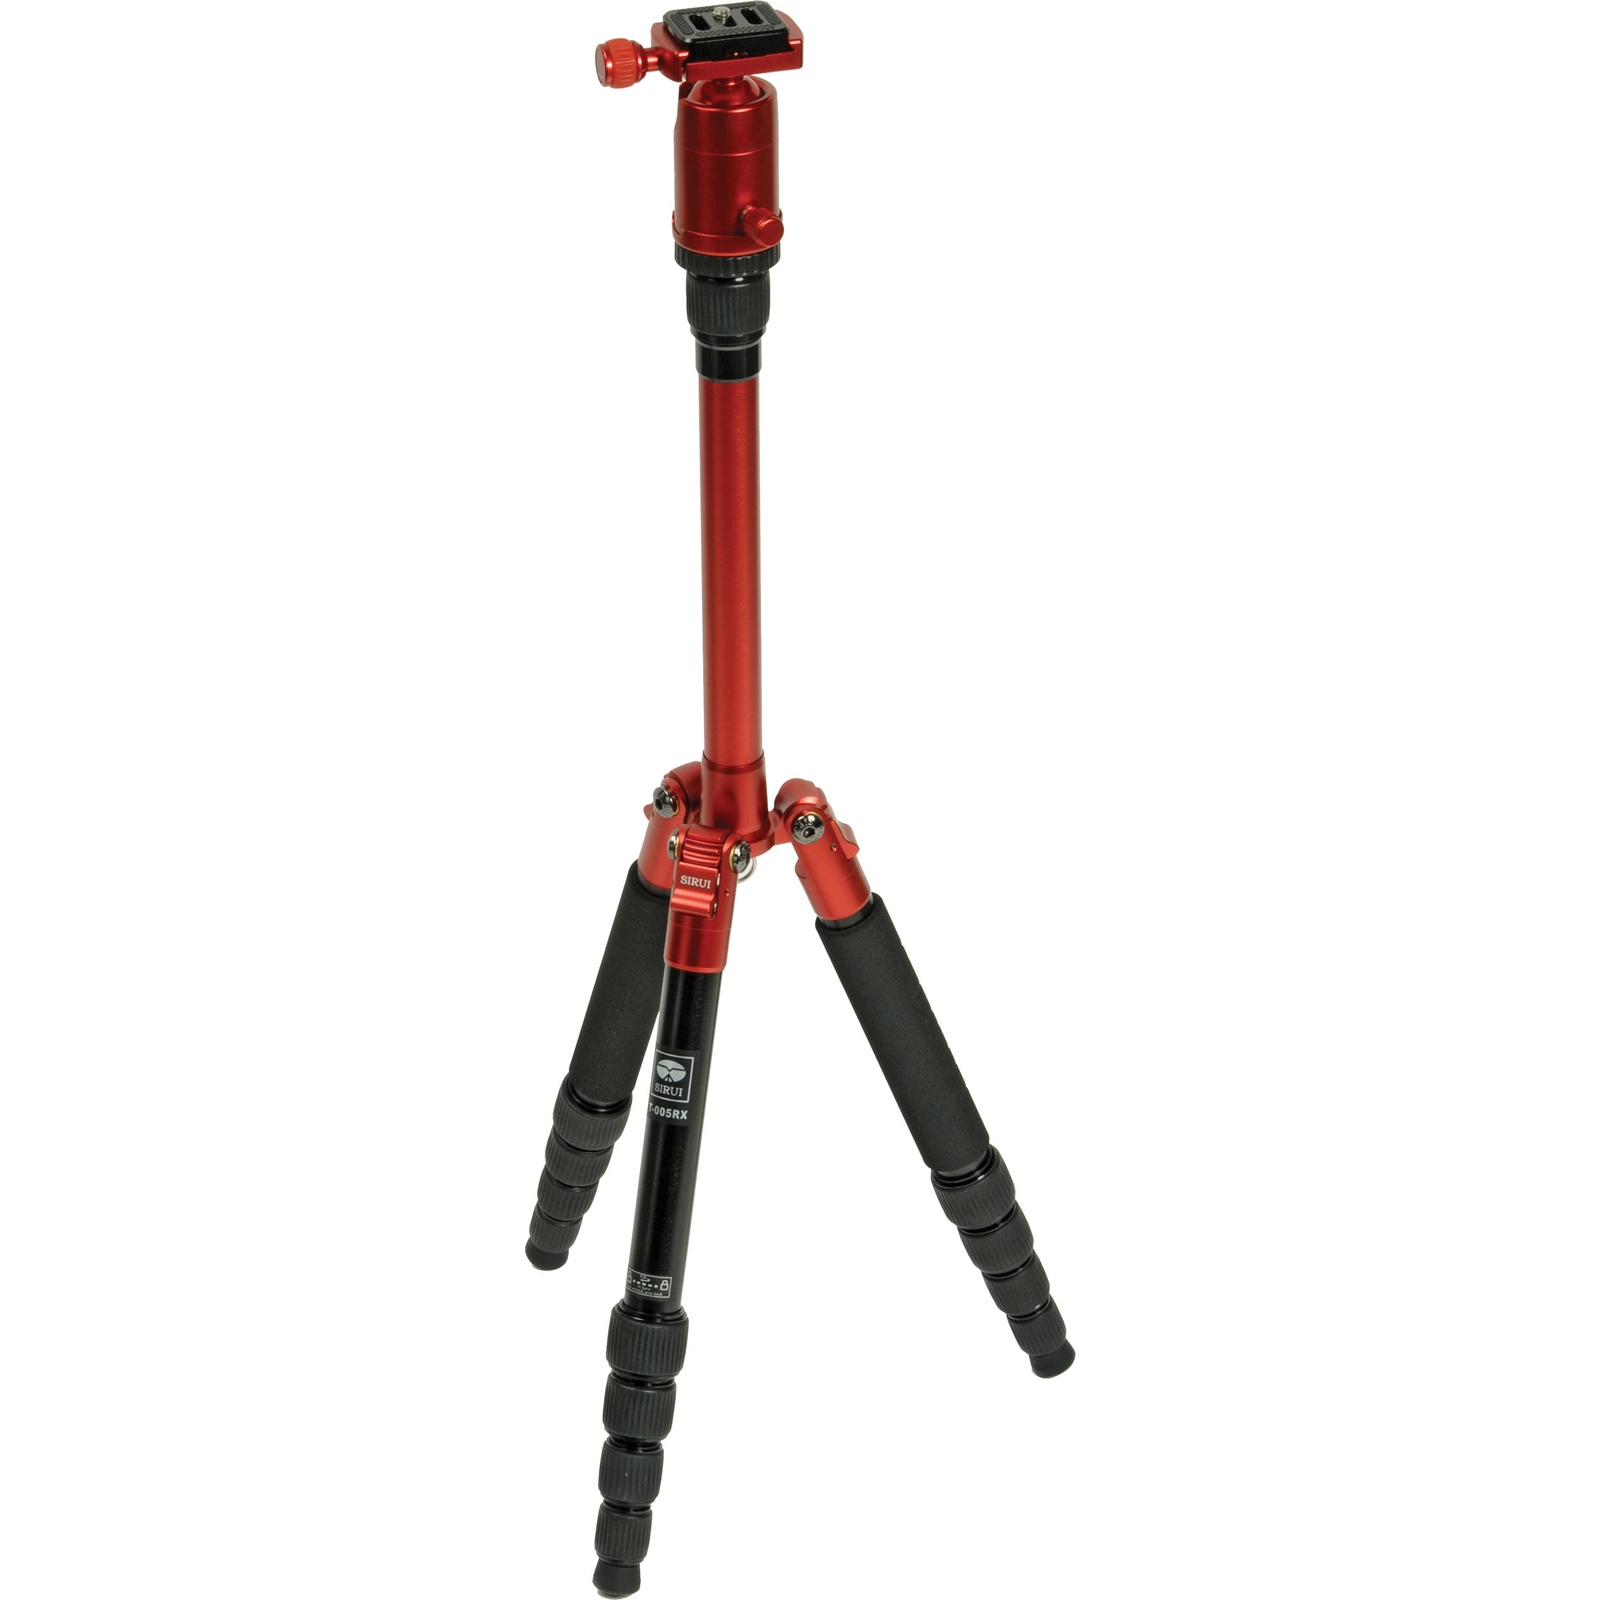 Sirui T-005X 54" Aluminum Alloy Tripod with C-10X Ball Head & Case (Red) - image 1 of 4